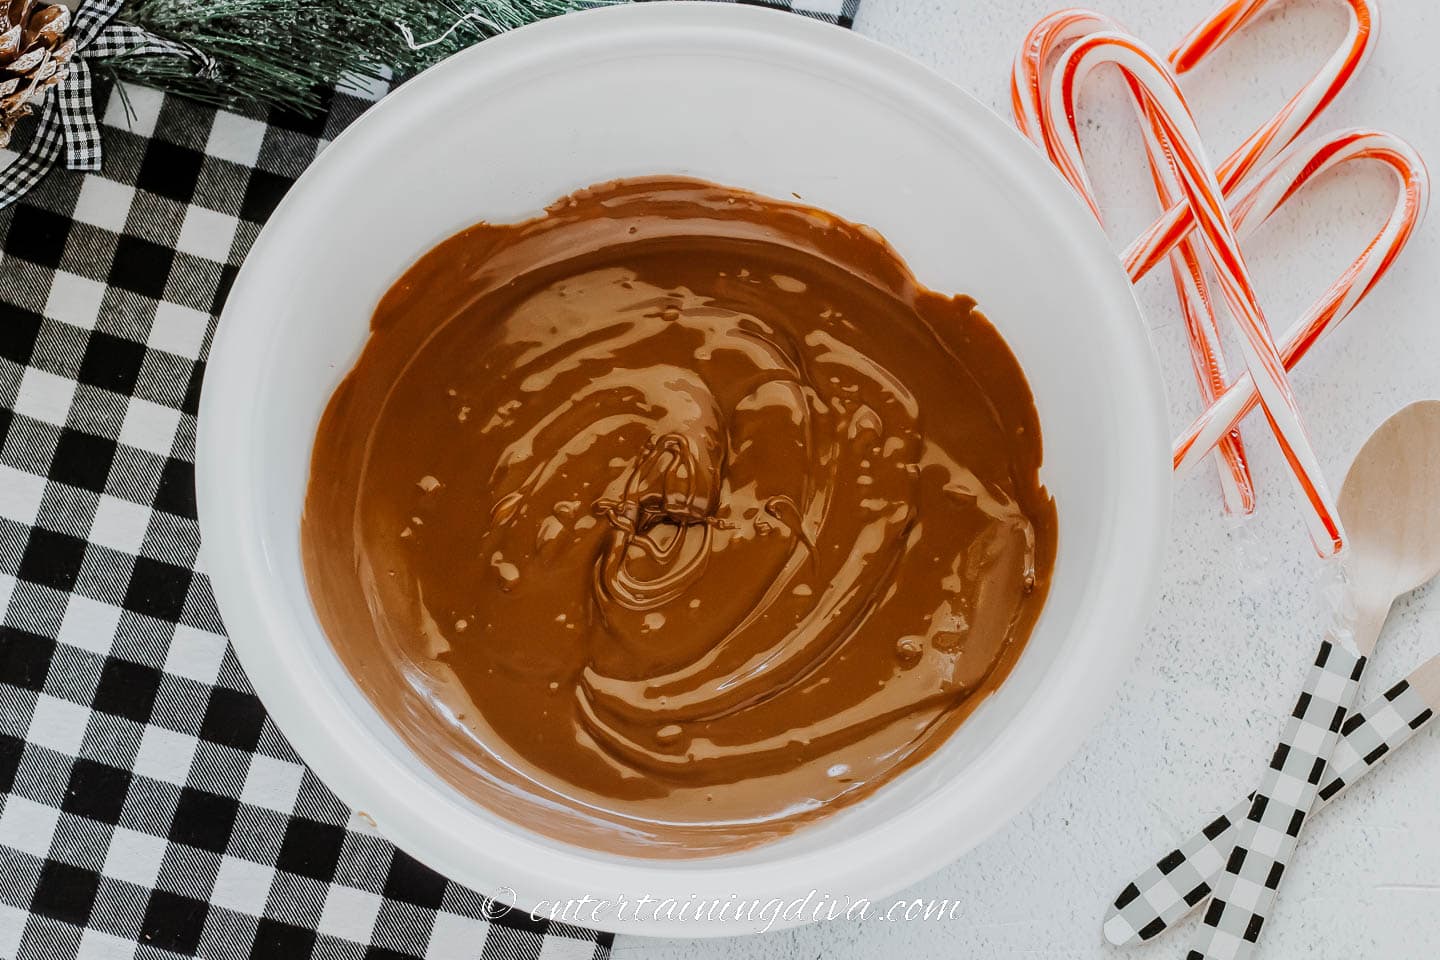 Melted chocolate in a bowl beside candy canes and disposable wooden spoons